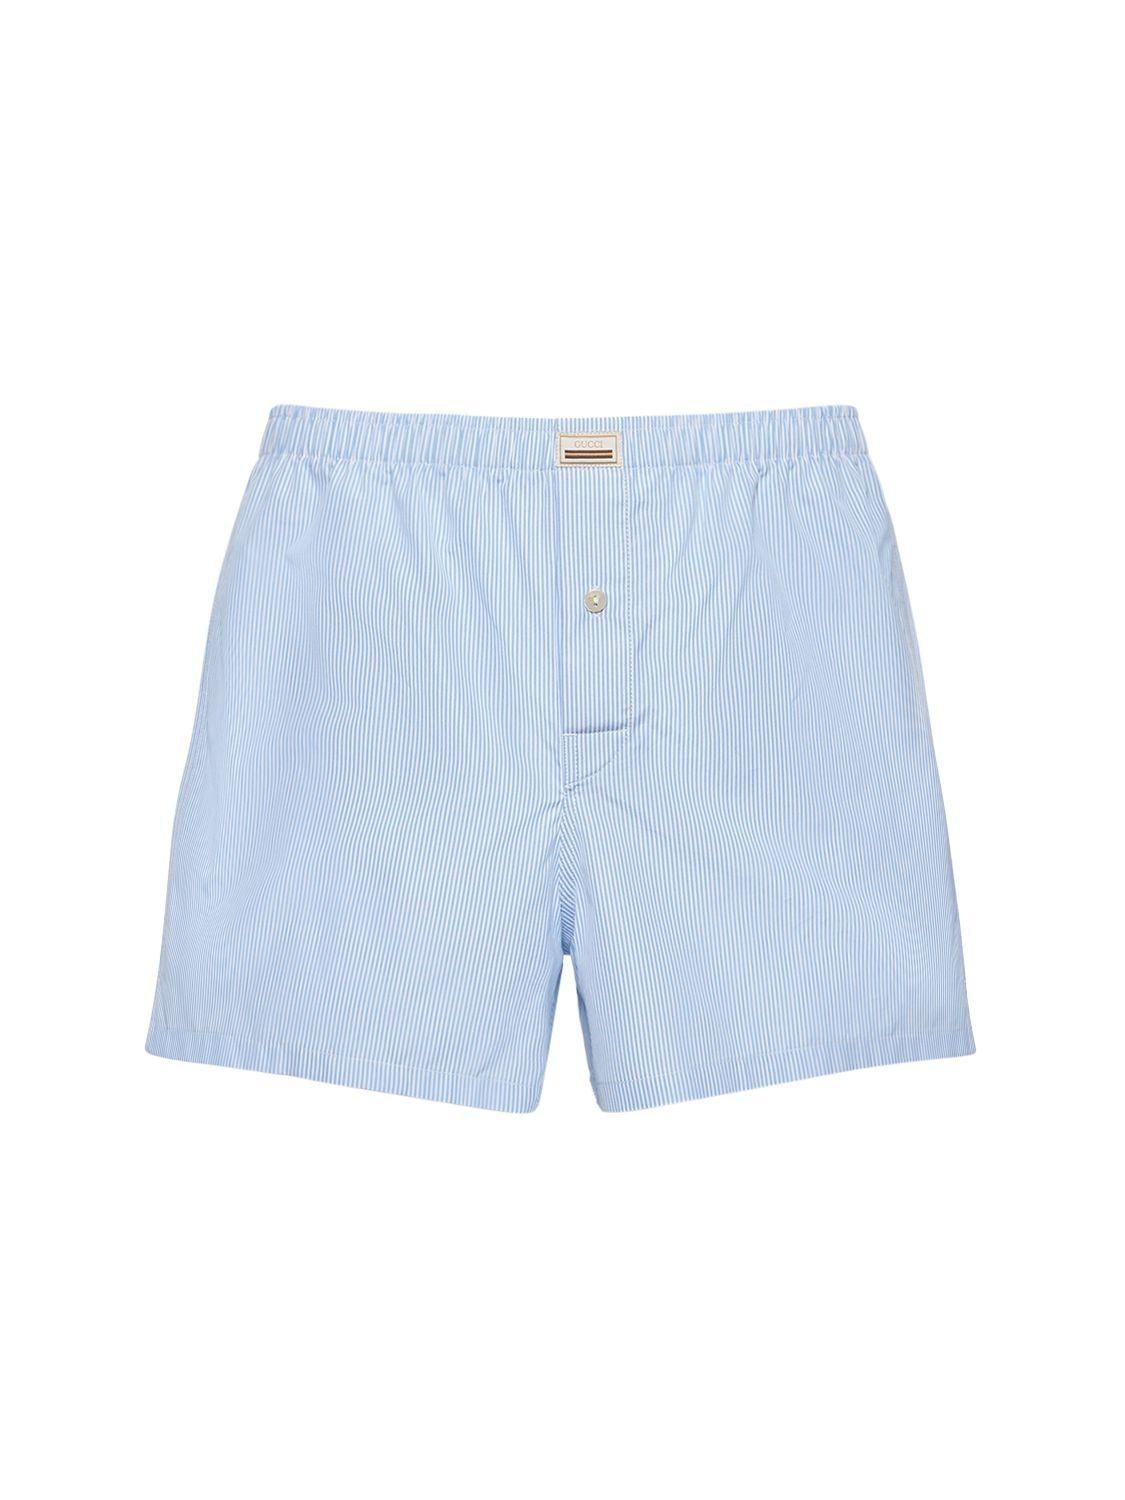 Gucci Logo Striped Cotton Boxer Shorts in Blue for Men | Lyst